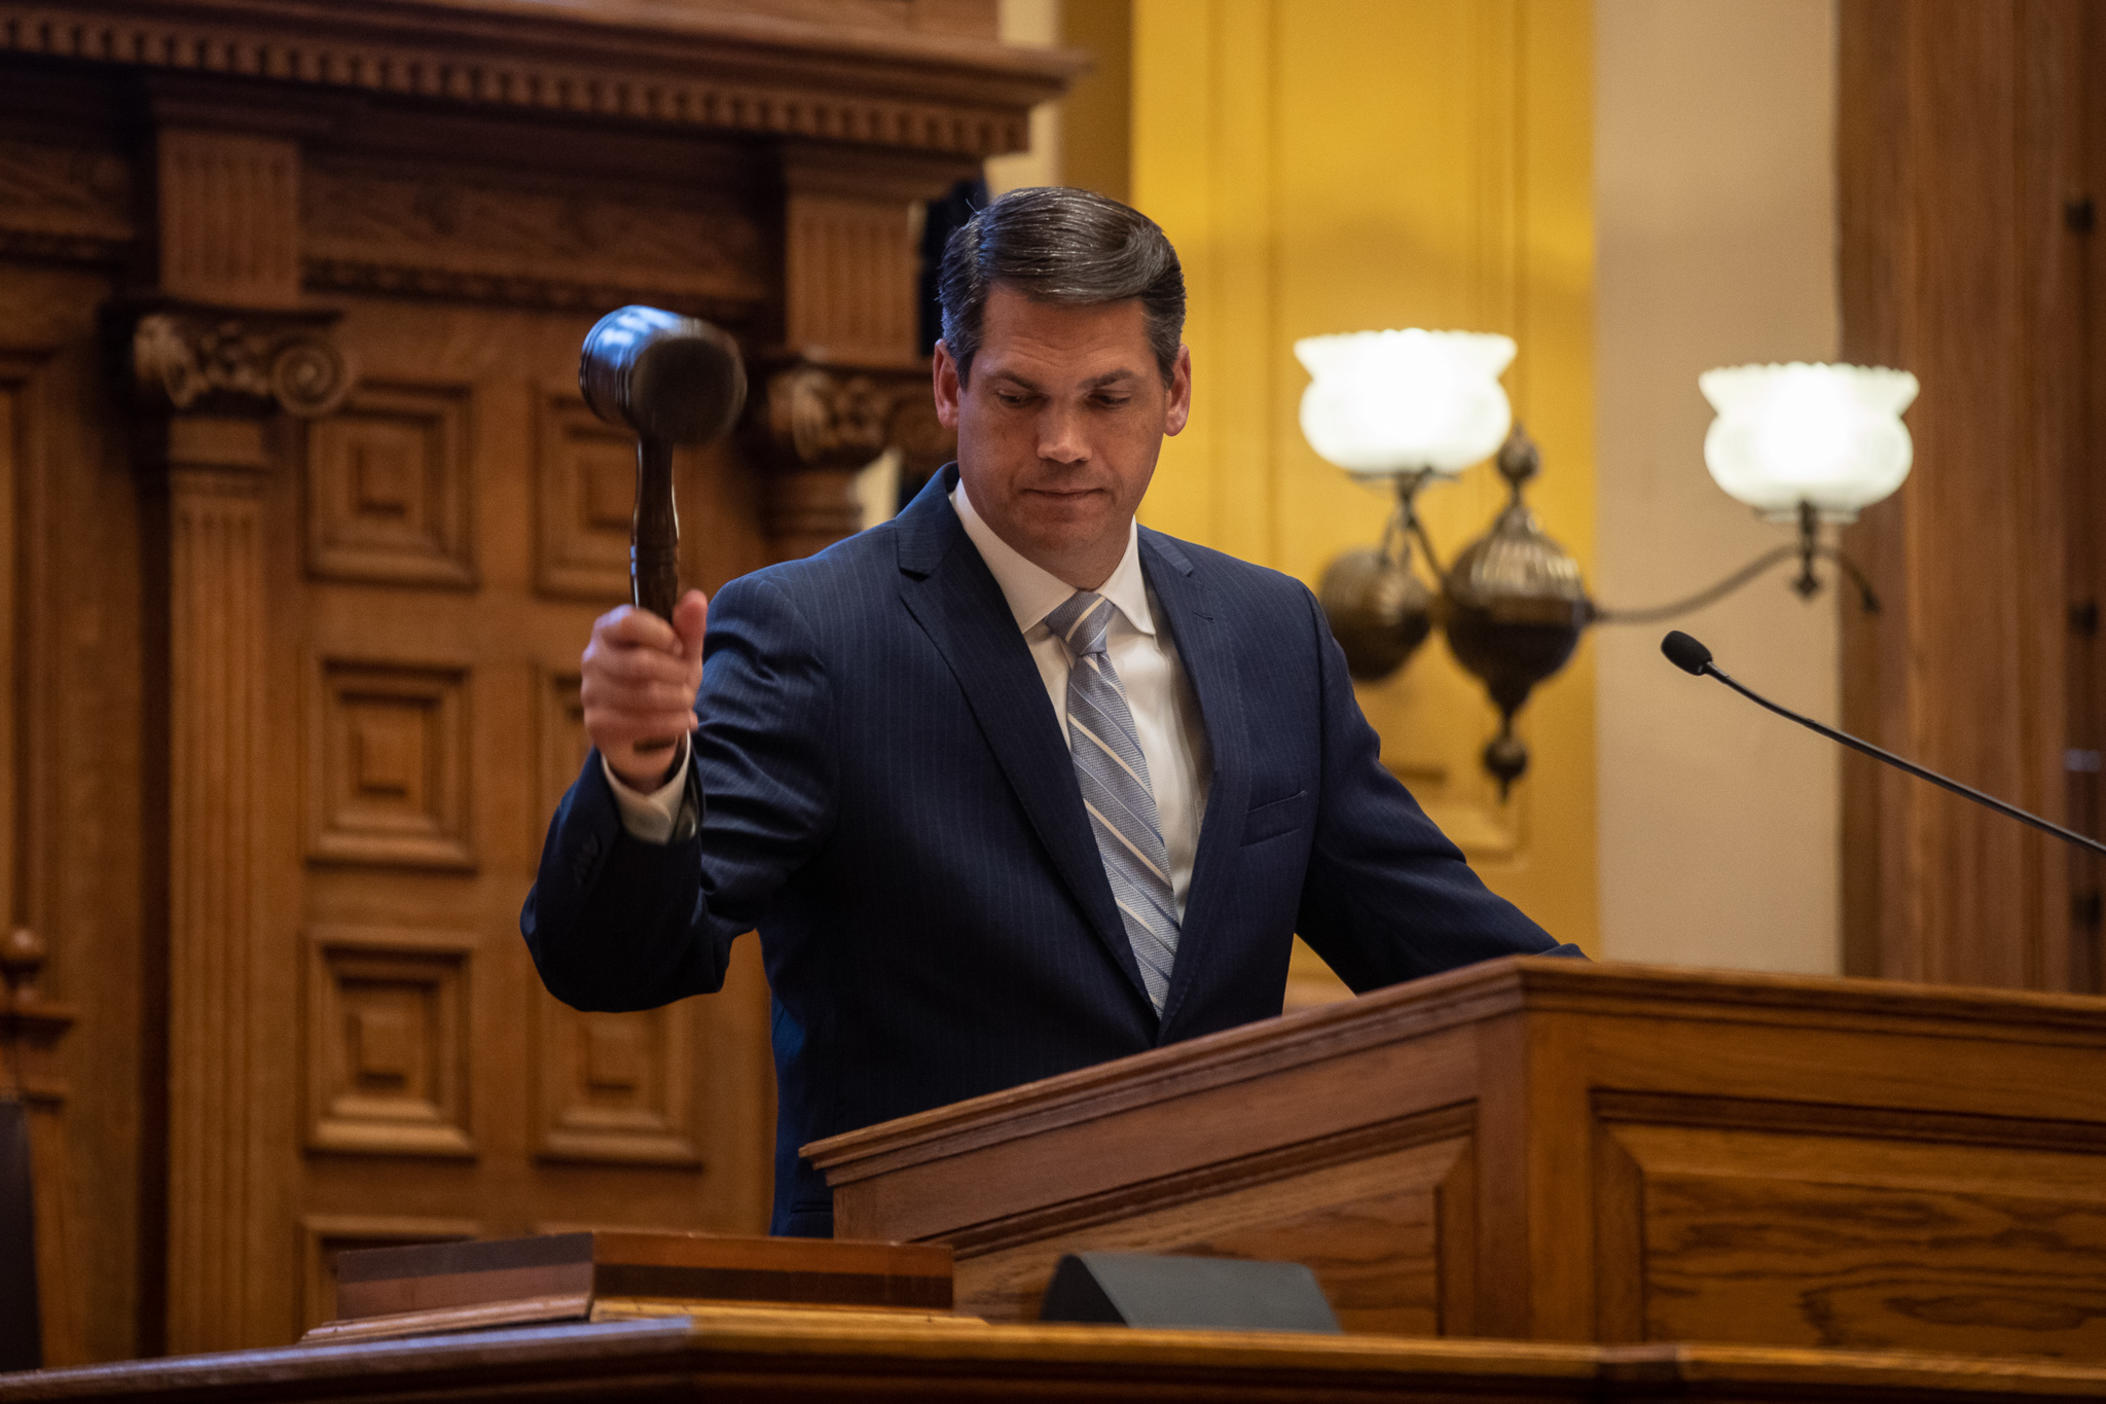 Lt. Gov. Geoff Duncan hammers the gavel in the Senate Chamber on the first day of the 2022 legislative session.